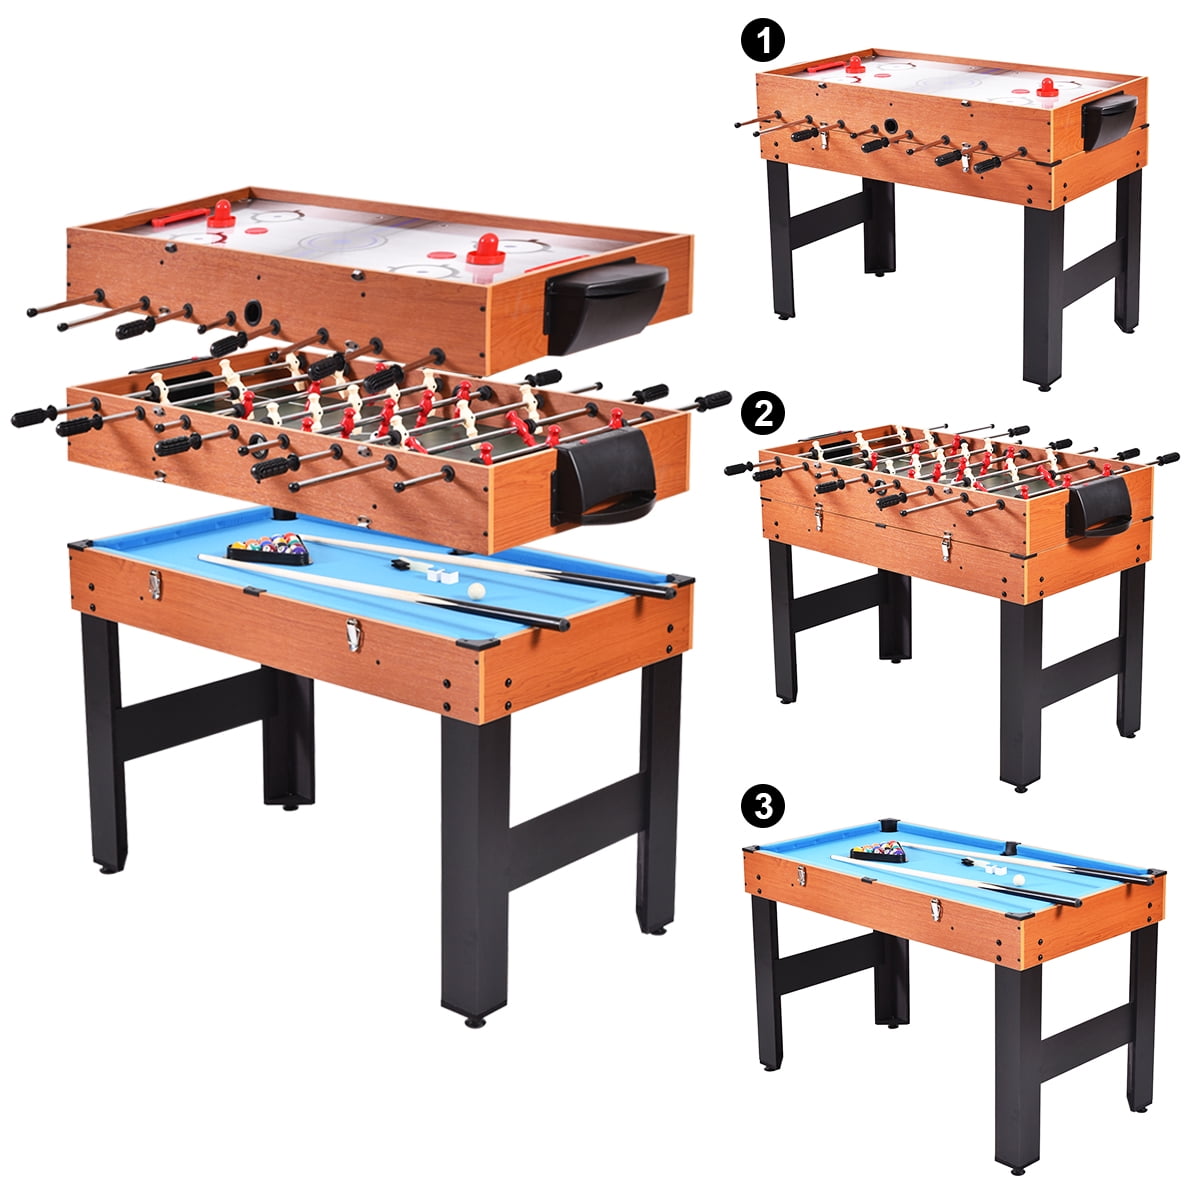 Details about   Family Sport Table 3-In-1 Multi Combo Game Foosball Soccer Billiards Pool Hockey